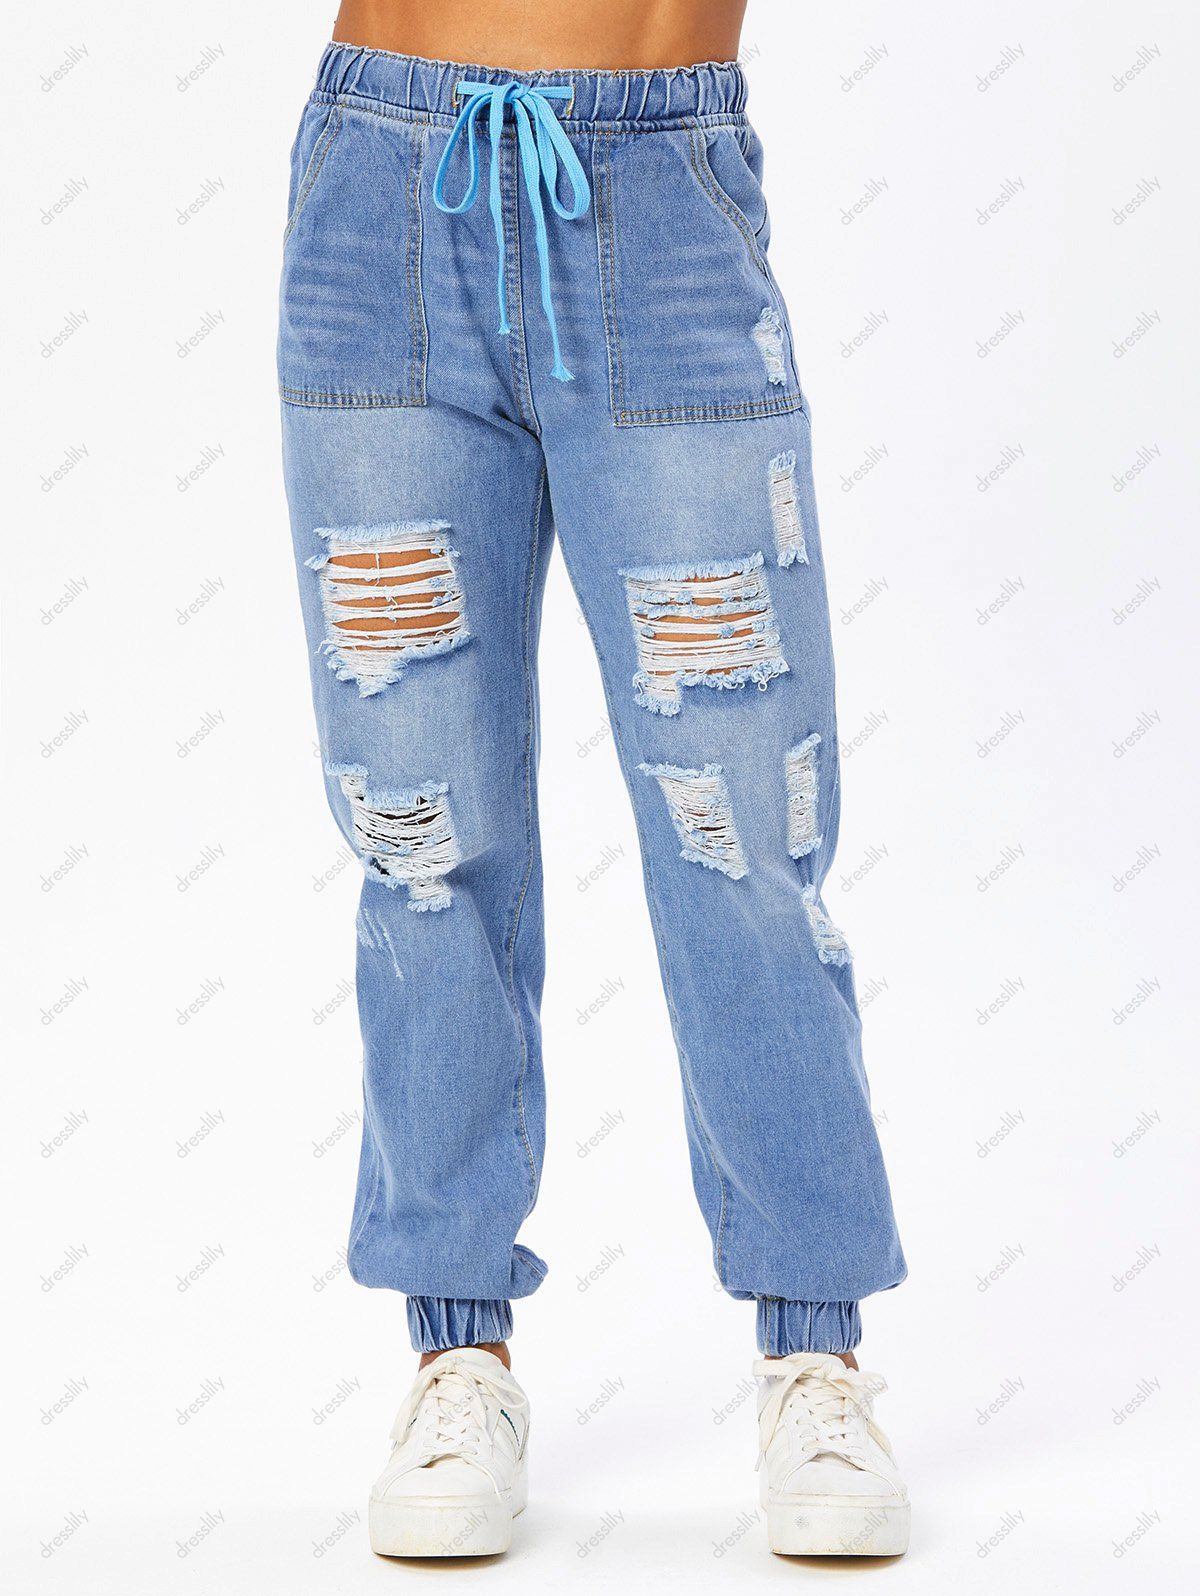 Casual Jeans Ripped Drawstring Pockets Beam Feet Destroyed Trendy Denim Pants 